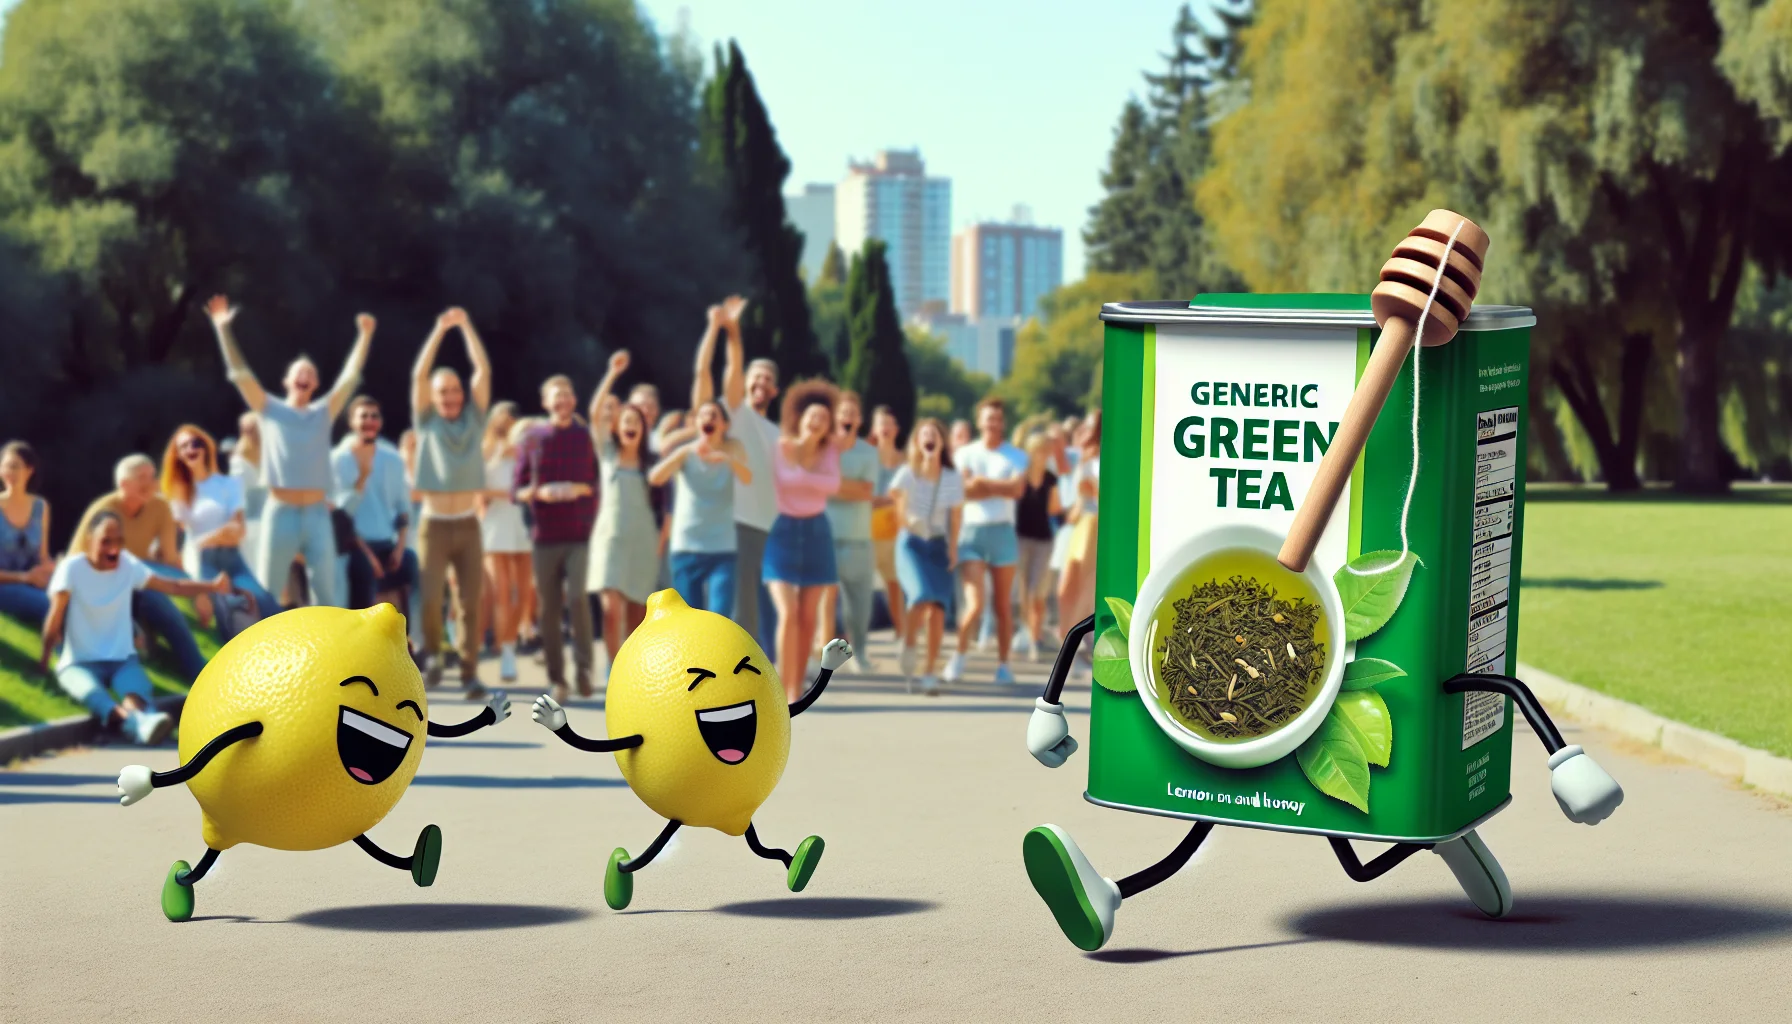 Create an image of a fun scene that includes a generic brand of green tea, not associated with any specific designer or personality. The setting could be in the park with onlookers in the background. The green tea appears to have sprouted legs and is playfully chasing around laughing lemon and honey characters. This light-hearted scenario should be enticing to people, painting the idea of drinking green tea as enjoyable and fun.